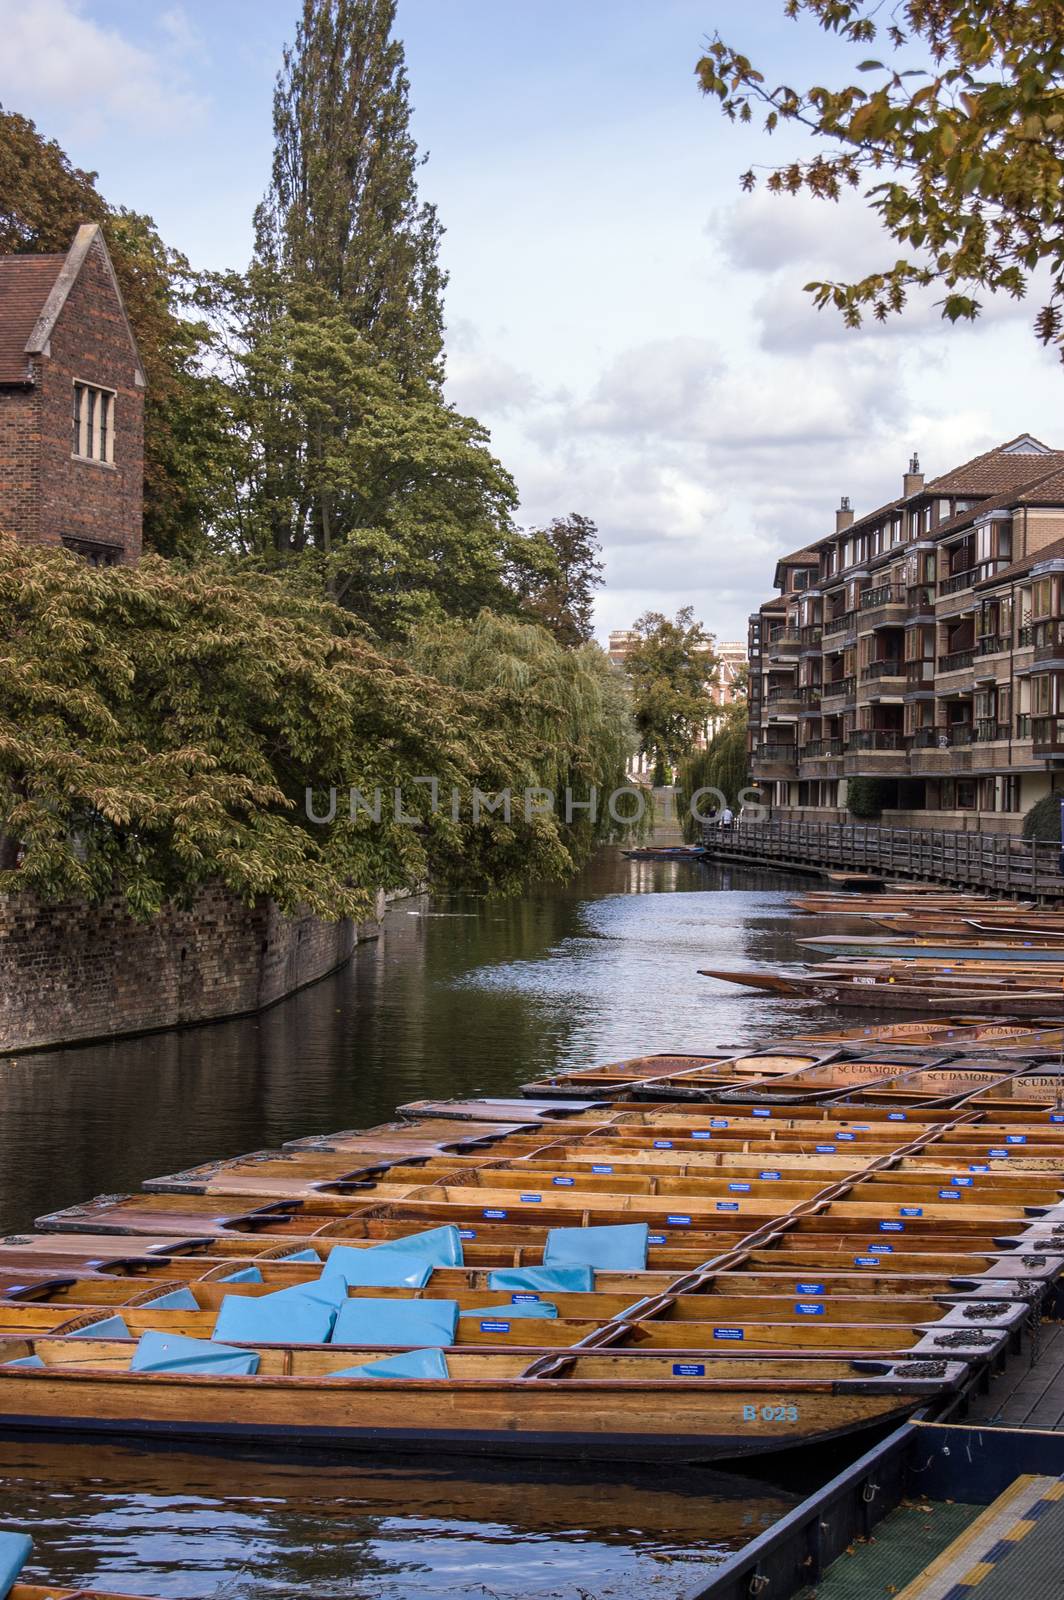 Cambridge, UK - September 19, 2011:  Punt rowing boats moored on the banks of the River Cam. Beside Magdalene College, Cambridge.